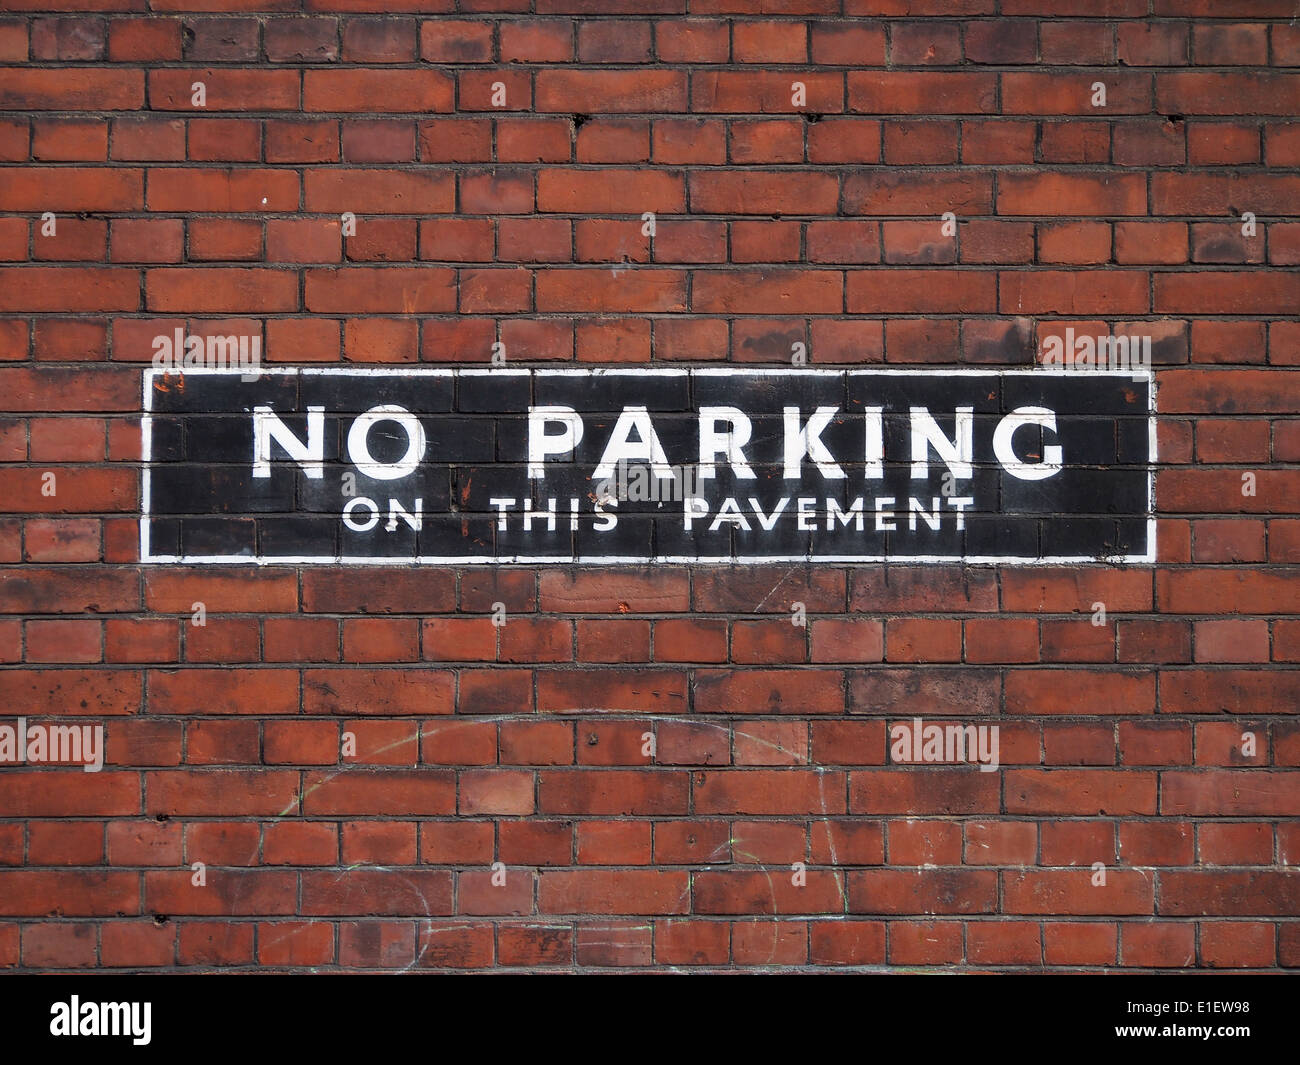 No parking sign Stock Photo